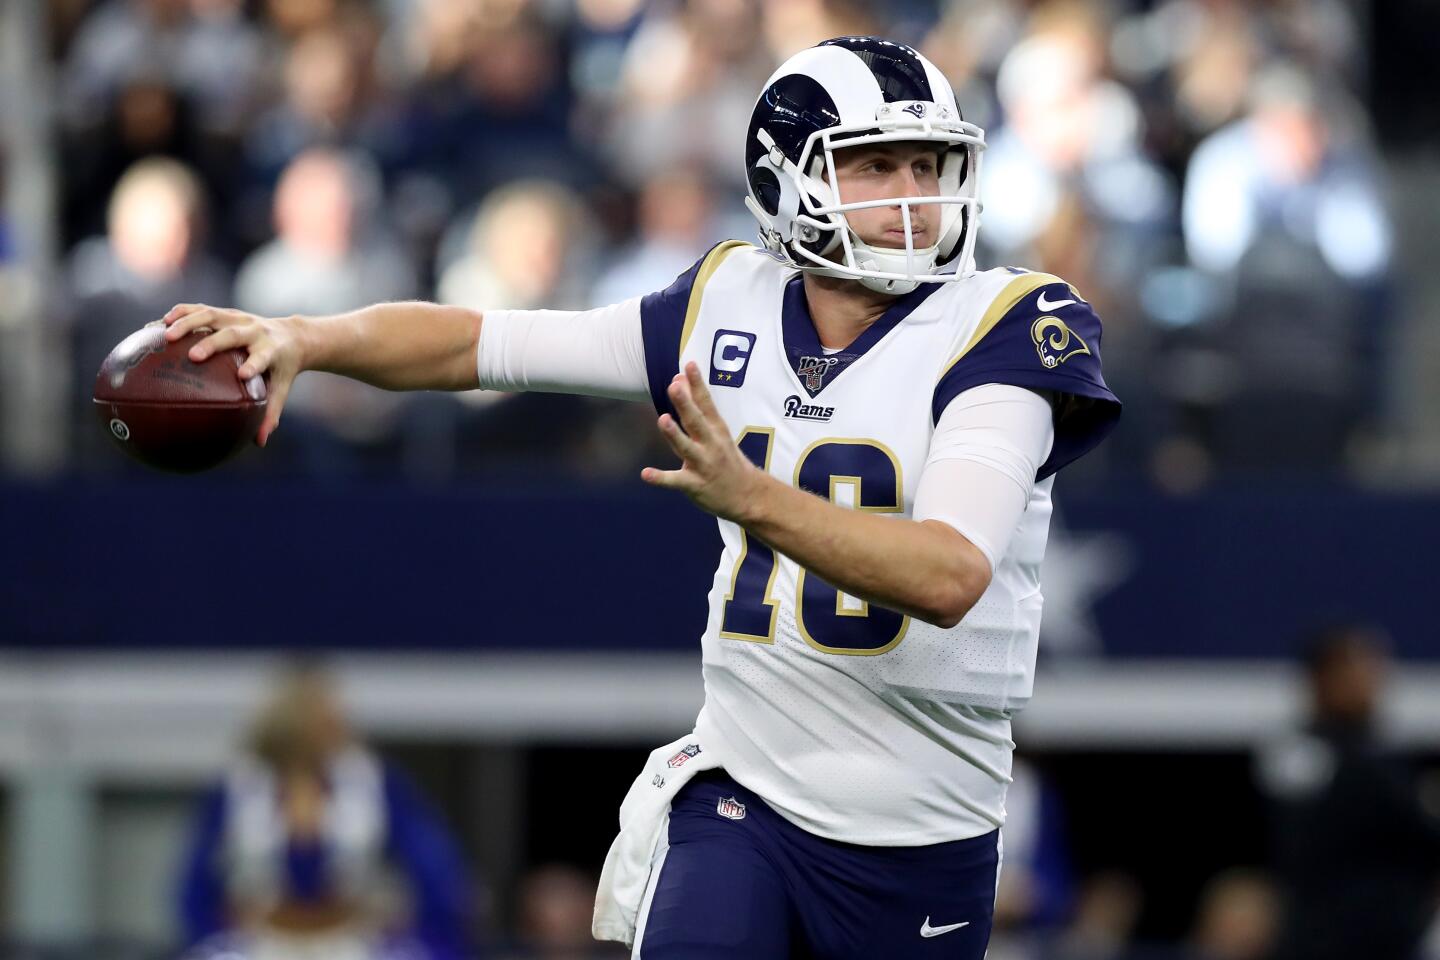 Rams quarterback Jared Goff looks to pass during the first quarter against the Dallas Cowboys.